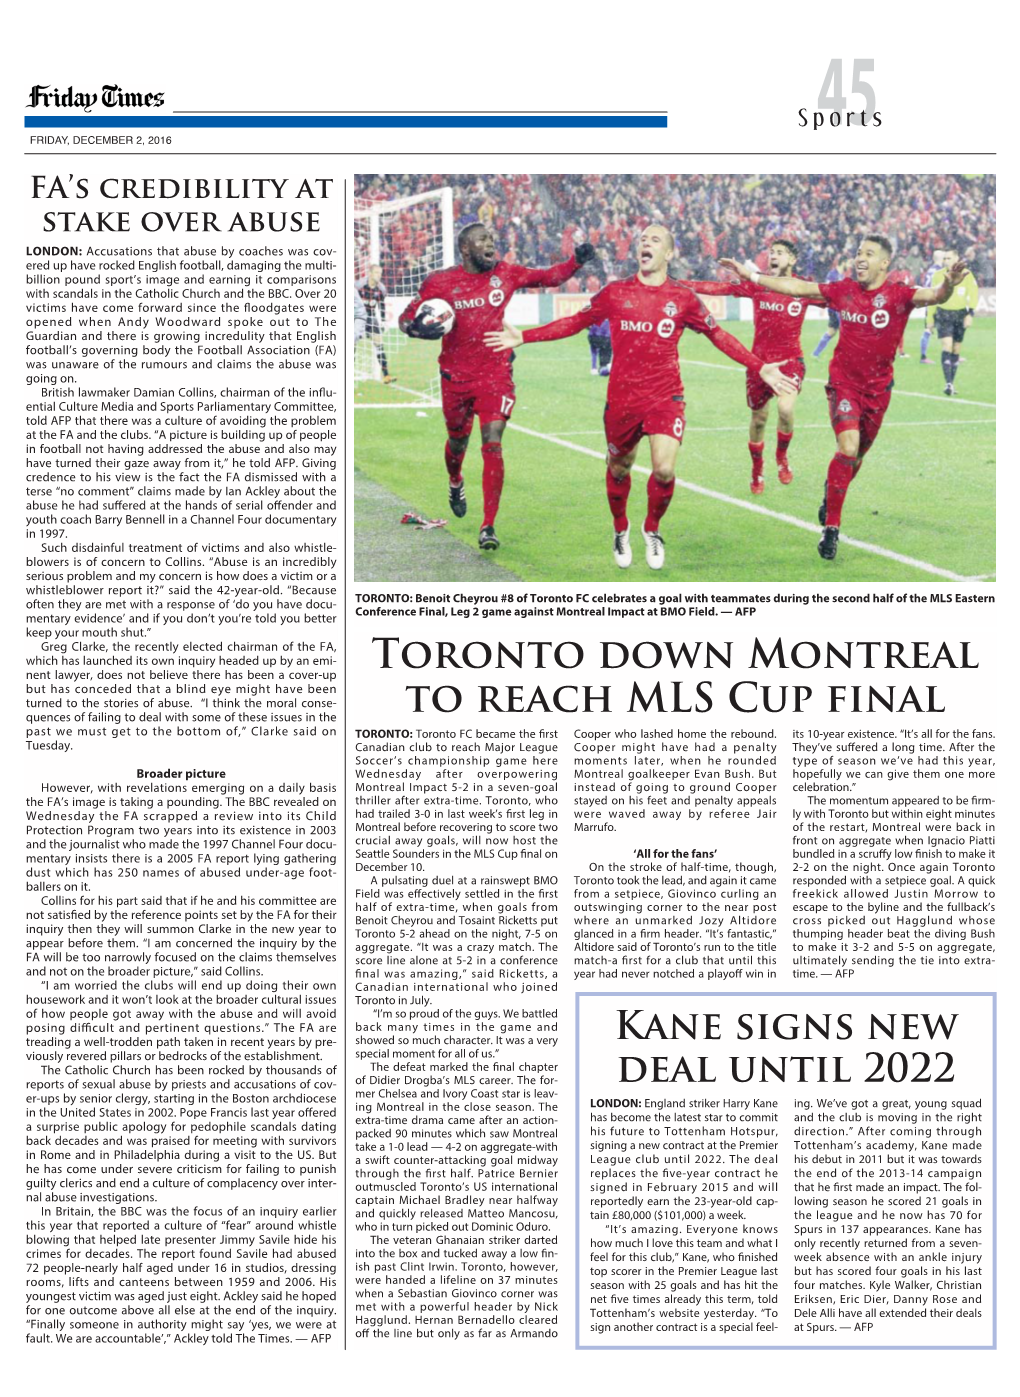 Toronto Down Montreal to Reach MLS Cup Final